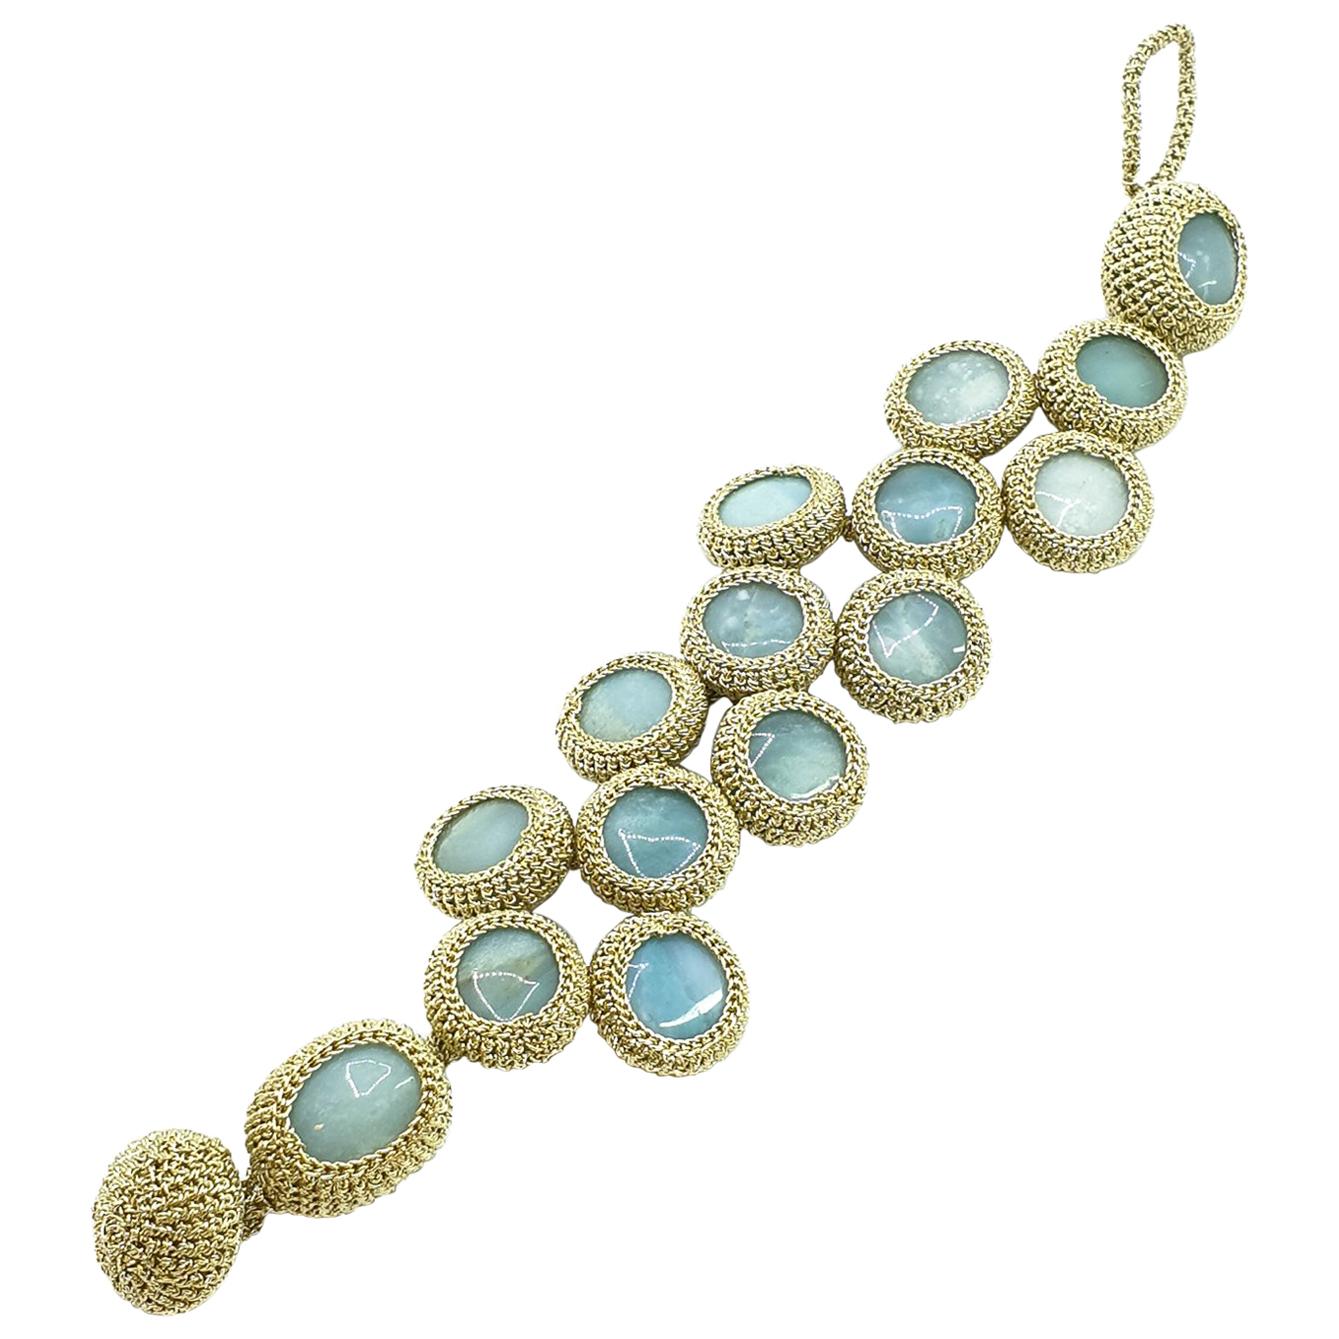 Gold Color Thread Blue Amazonite Contemporary Jewelry Crochet  Bracelet  For Sale